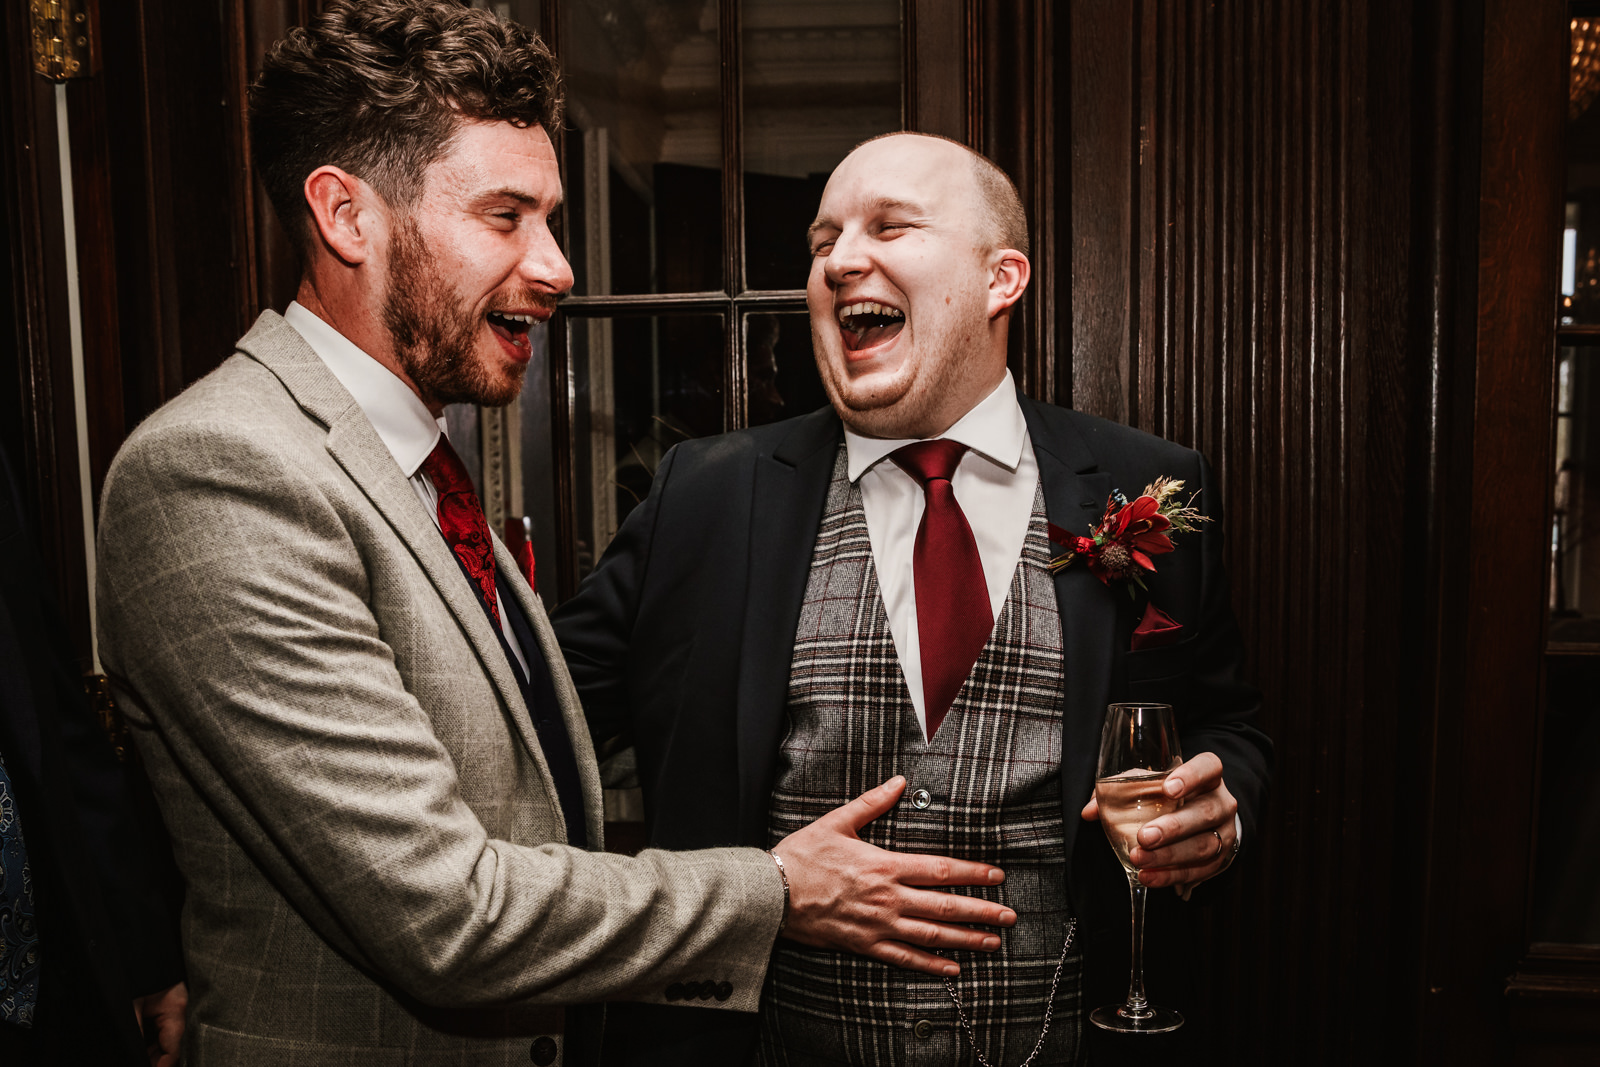 Groom laughing with his friend